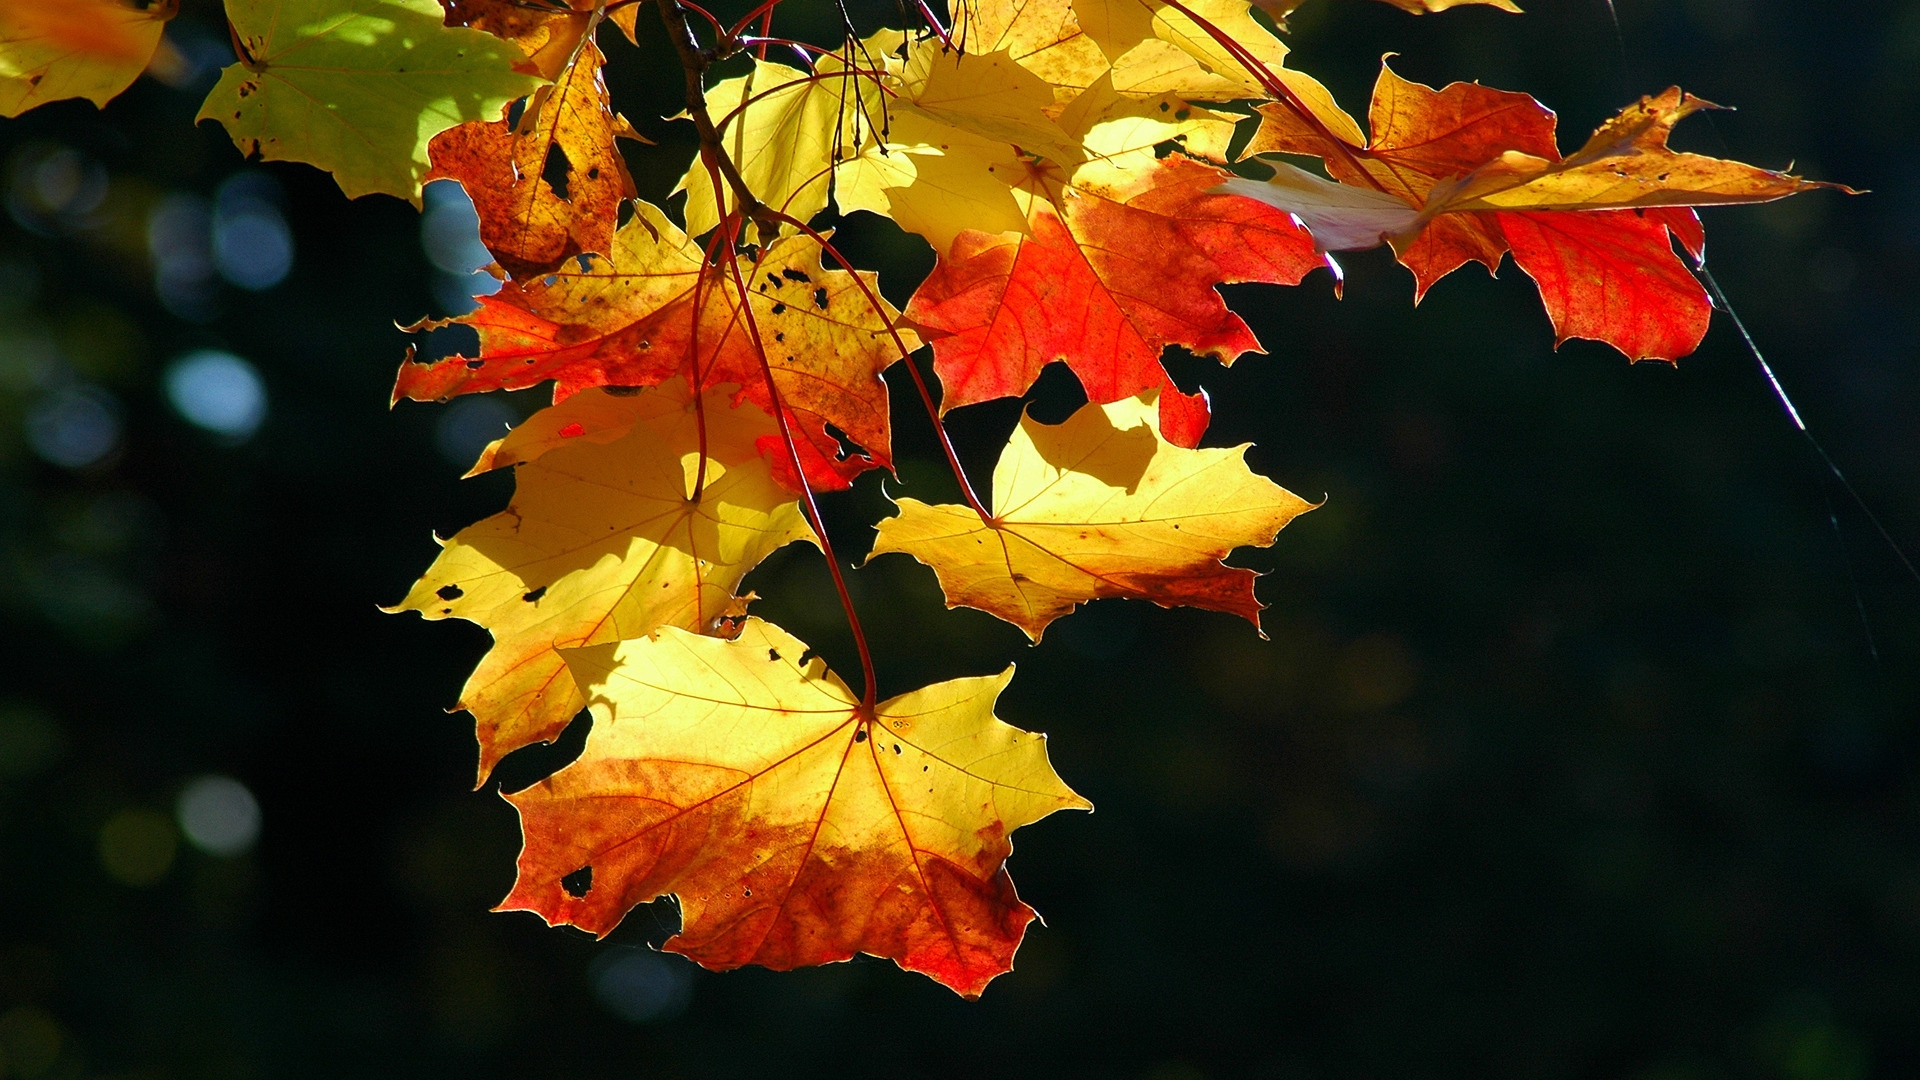 Colorful autumn leaves for 1920 x 1080 HDTV 1080p resolution